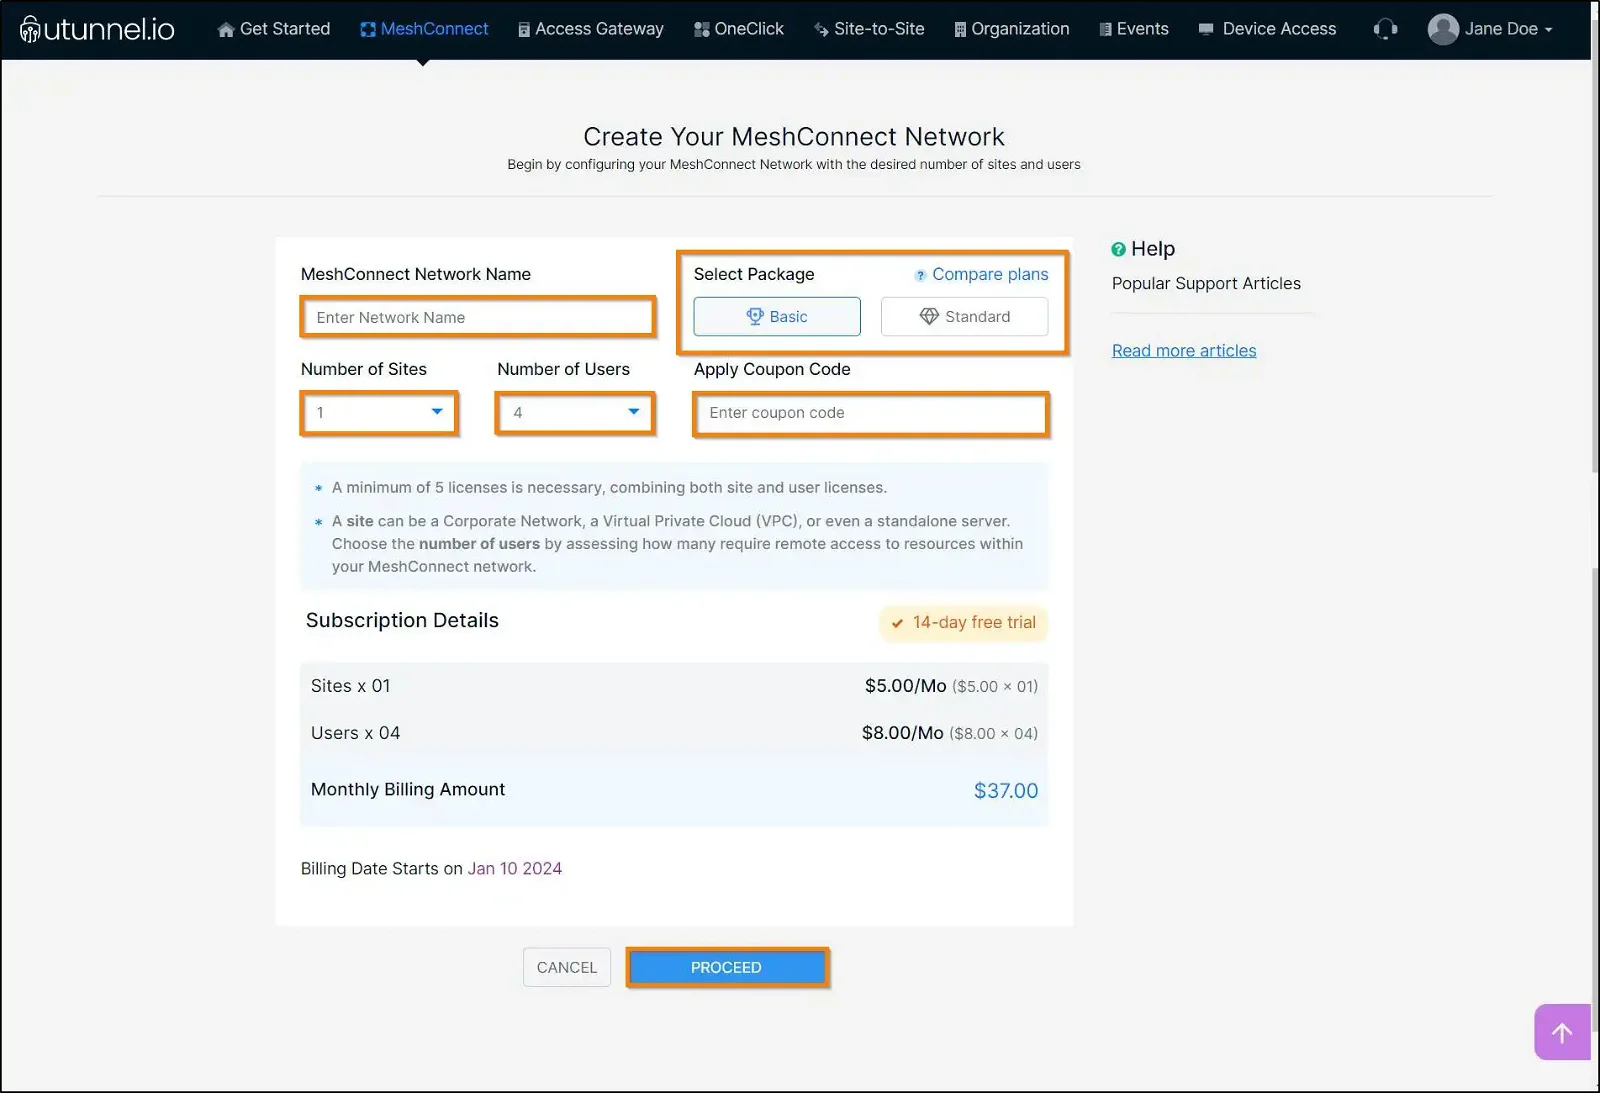 How to configure a MeshConnect network order summary page